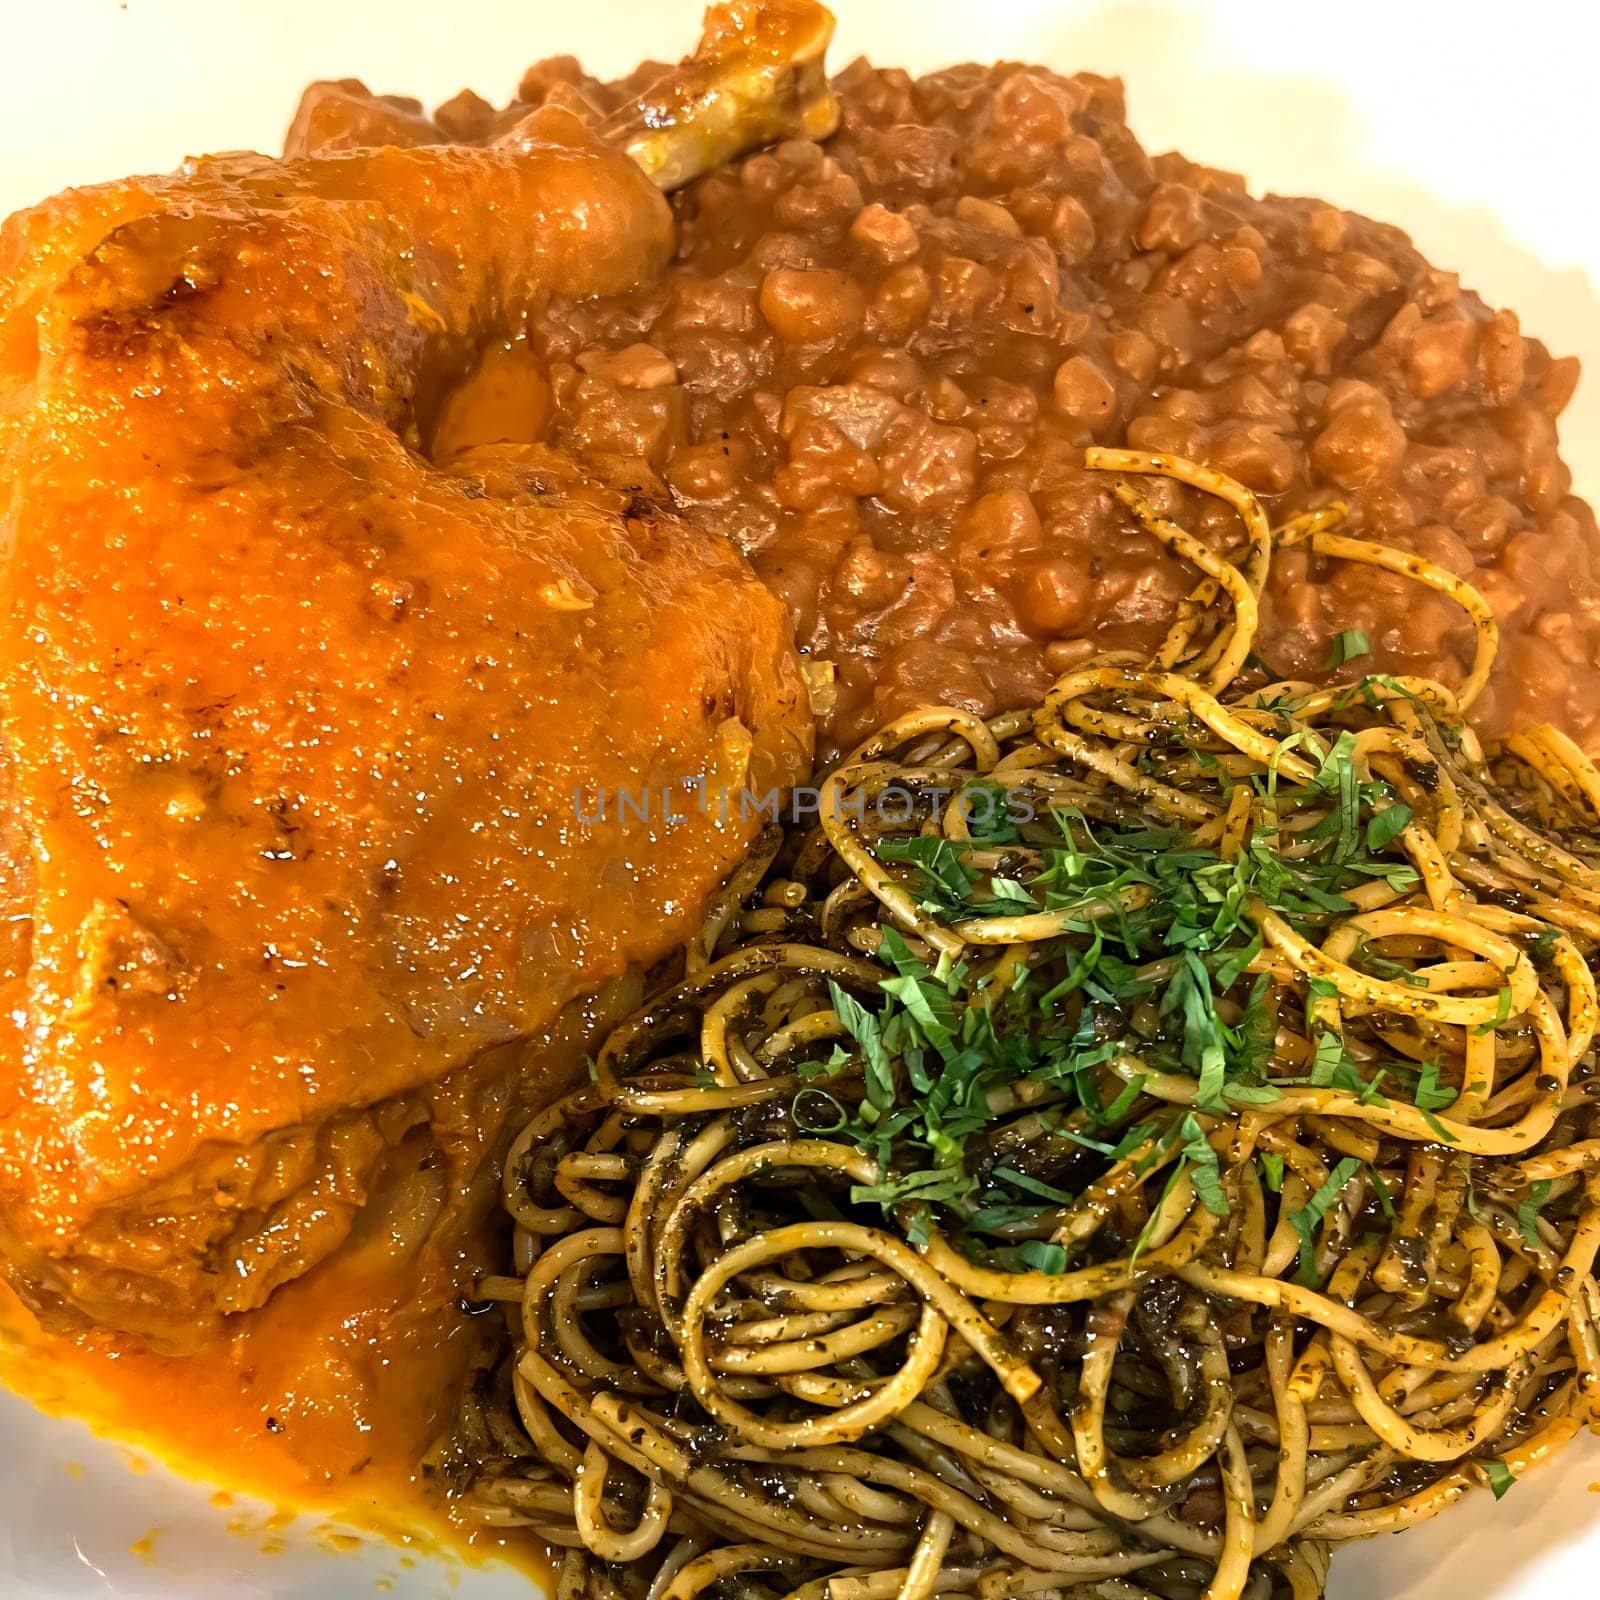 Close-up of a classic mexican dish featuring mole poblano, savory refried beans, and herb-infused green spaghetti